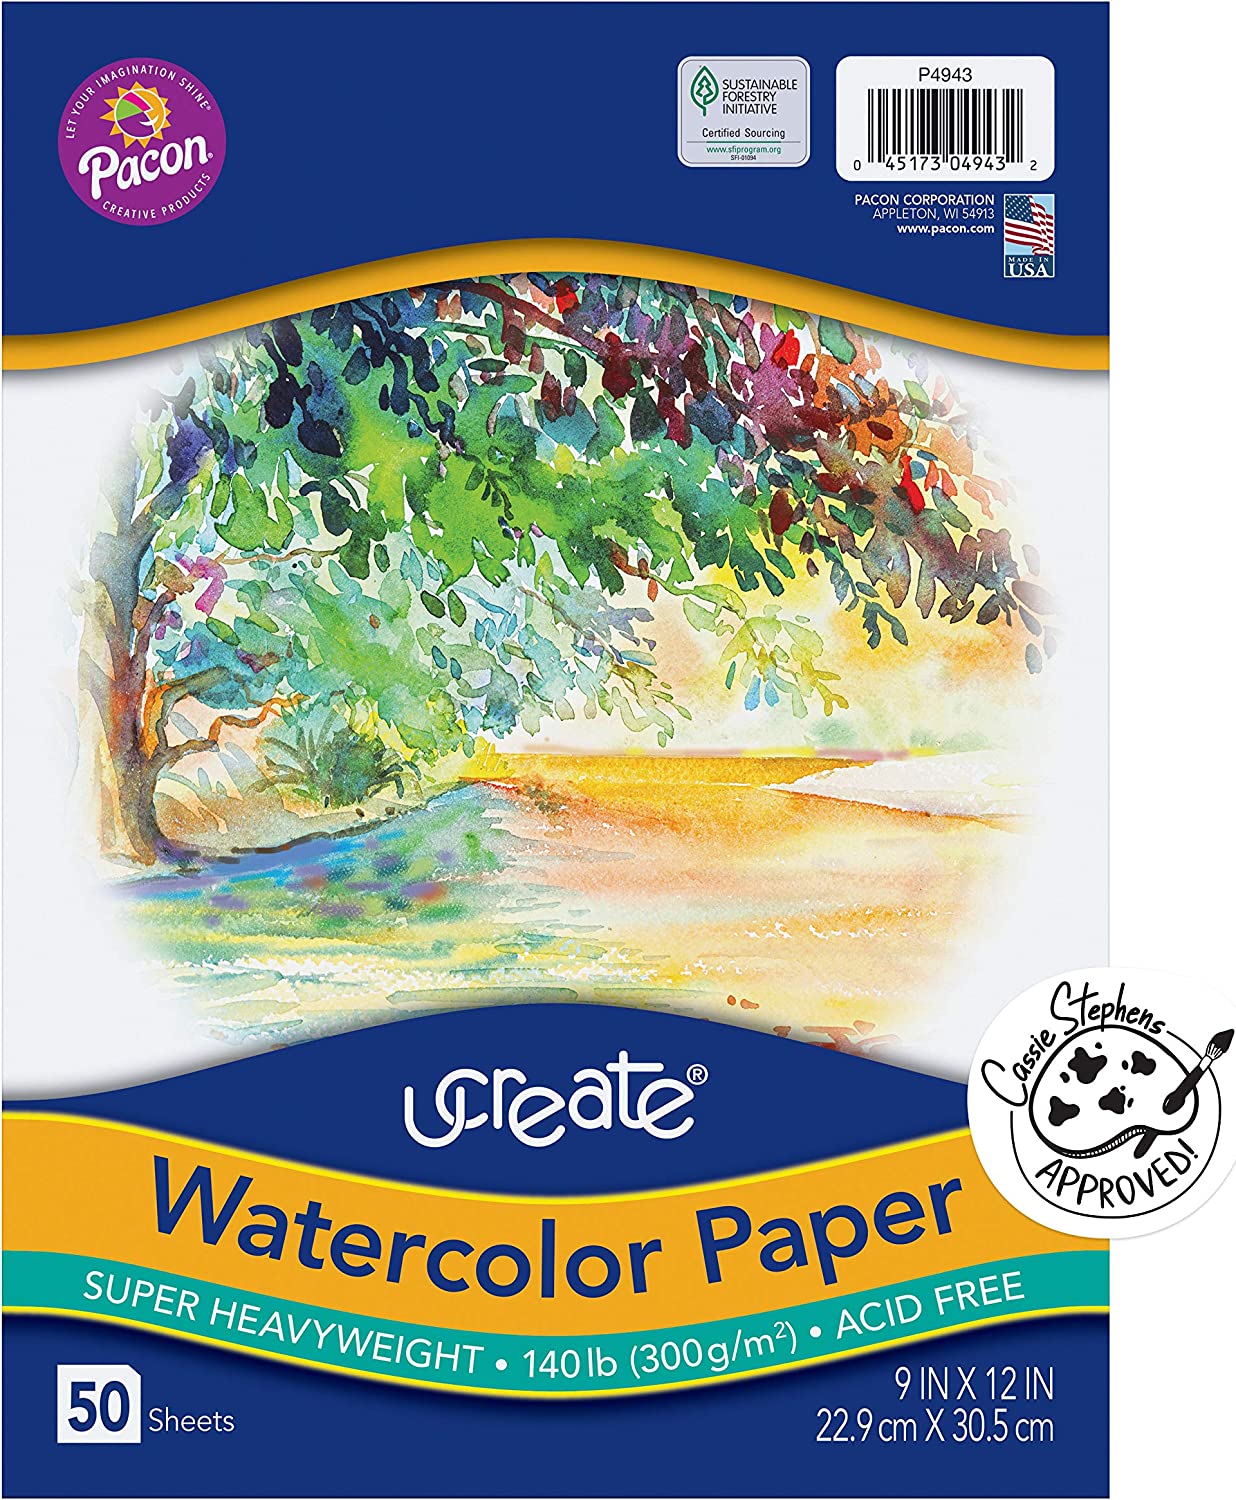 UCreate Watercolor Paper, White, Package, 140 lb., 9″ x 12″, 50 Sheets